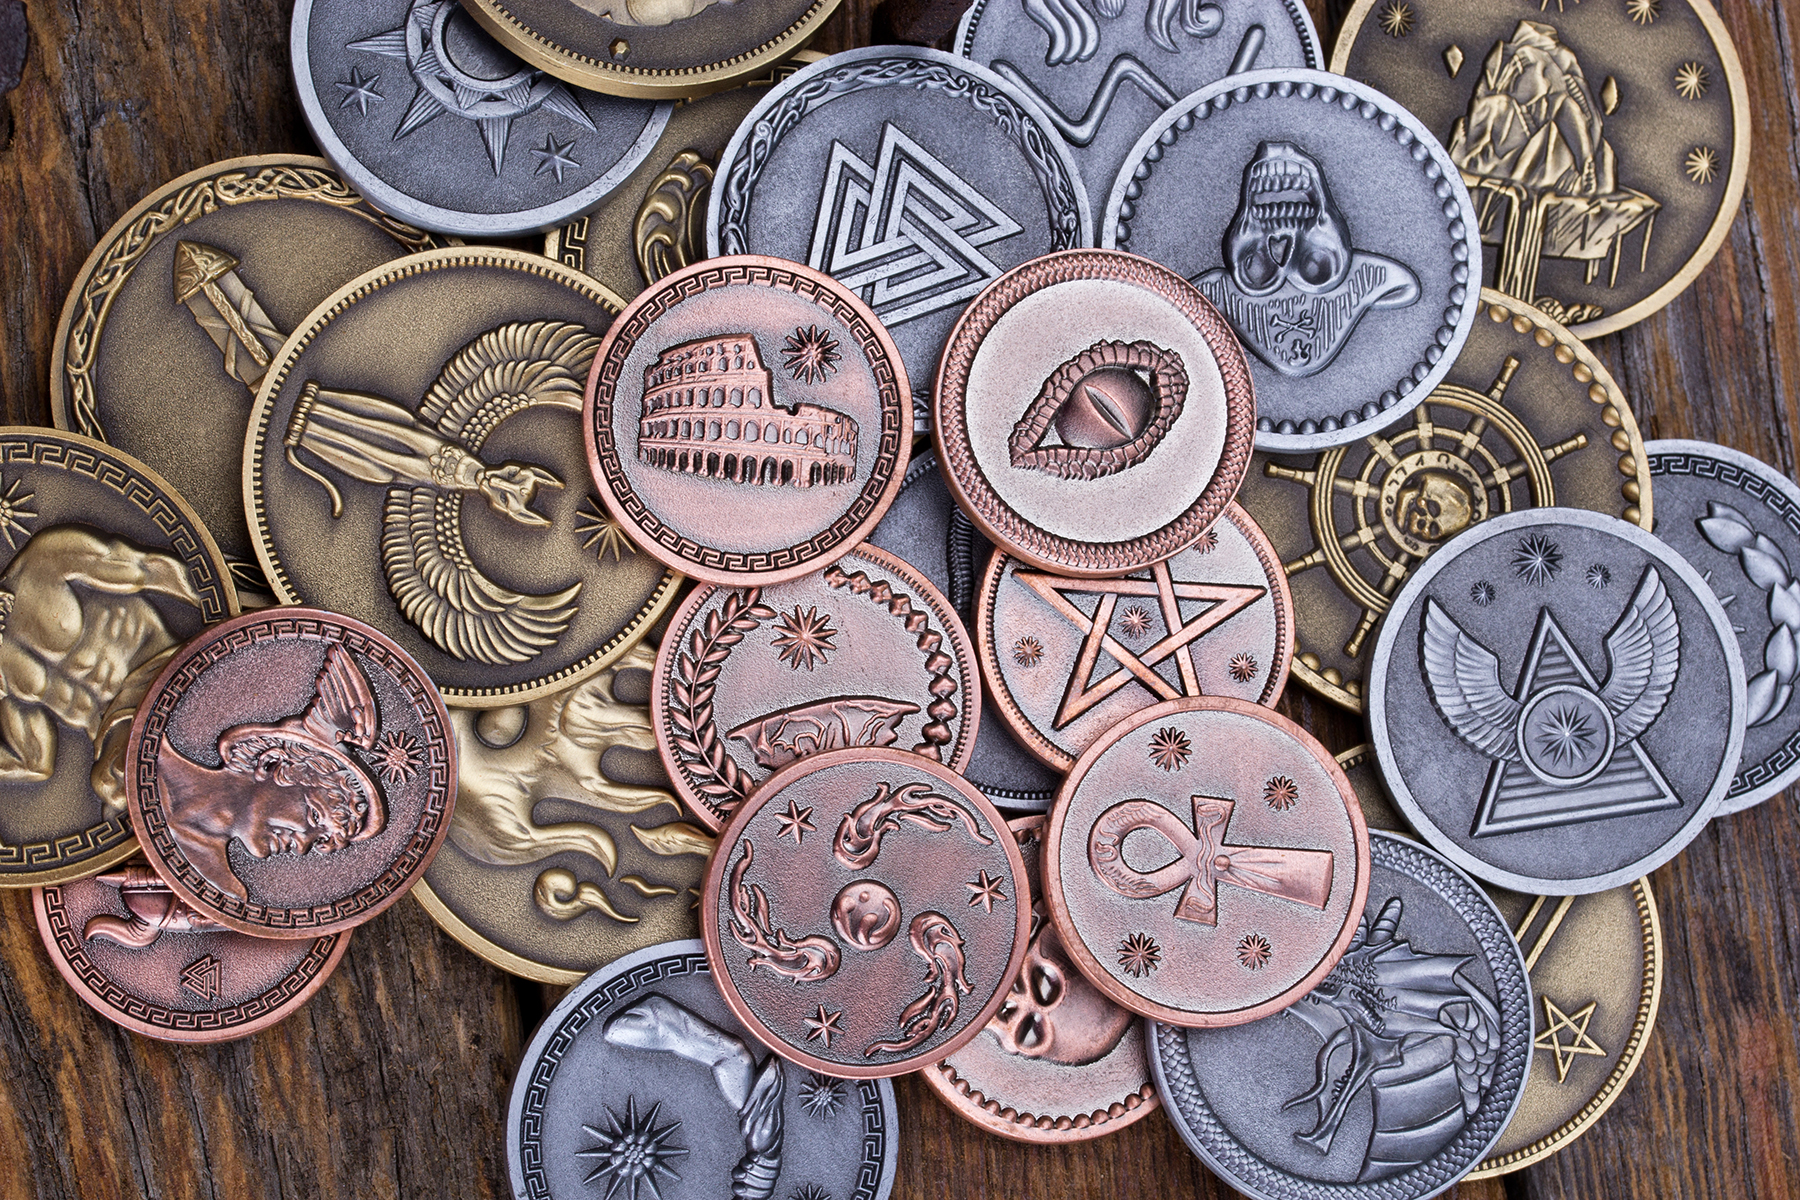 Metal Gaming Coins Kickstarter looks pretty damned cool – GAMING TREND